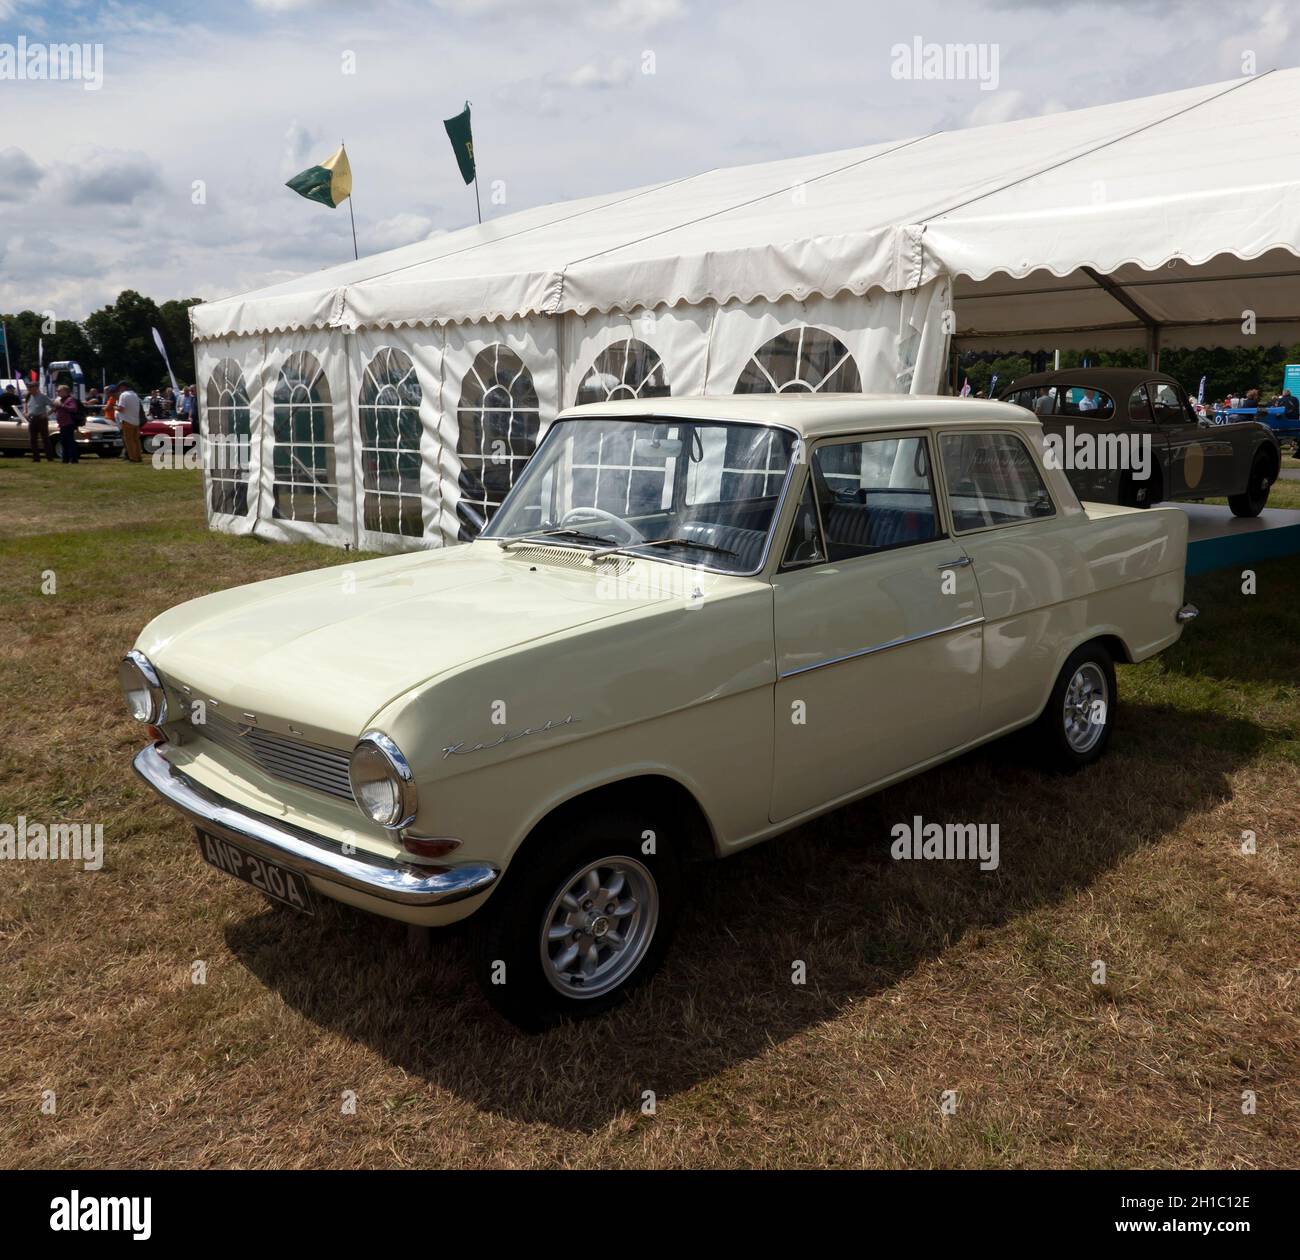 Richard Hammond's 1963 Opel Kadett "Oliver", which he drove in the Top Gear  Botswana Special, on display at the 2021 London Classic Car Show Stock  Photo - Alamy